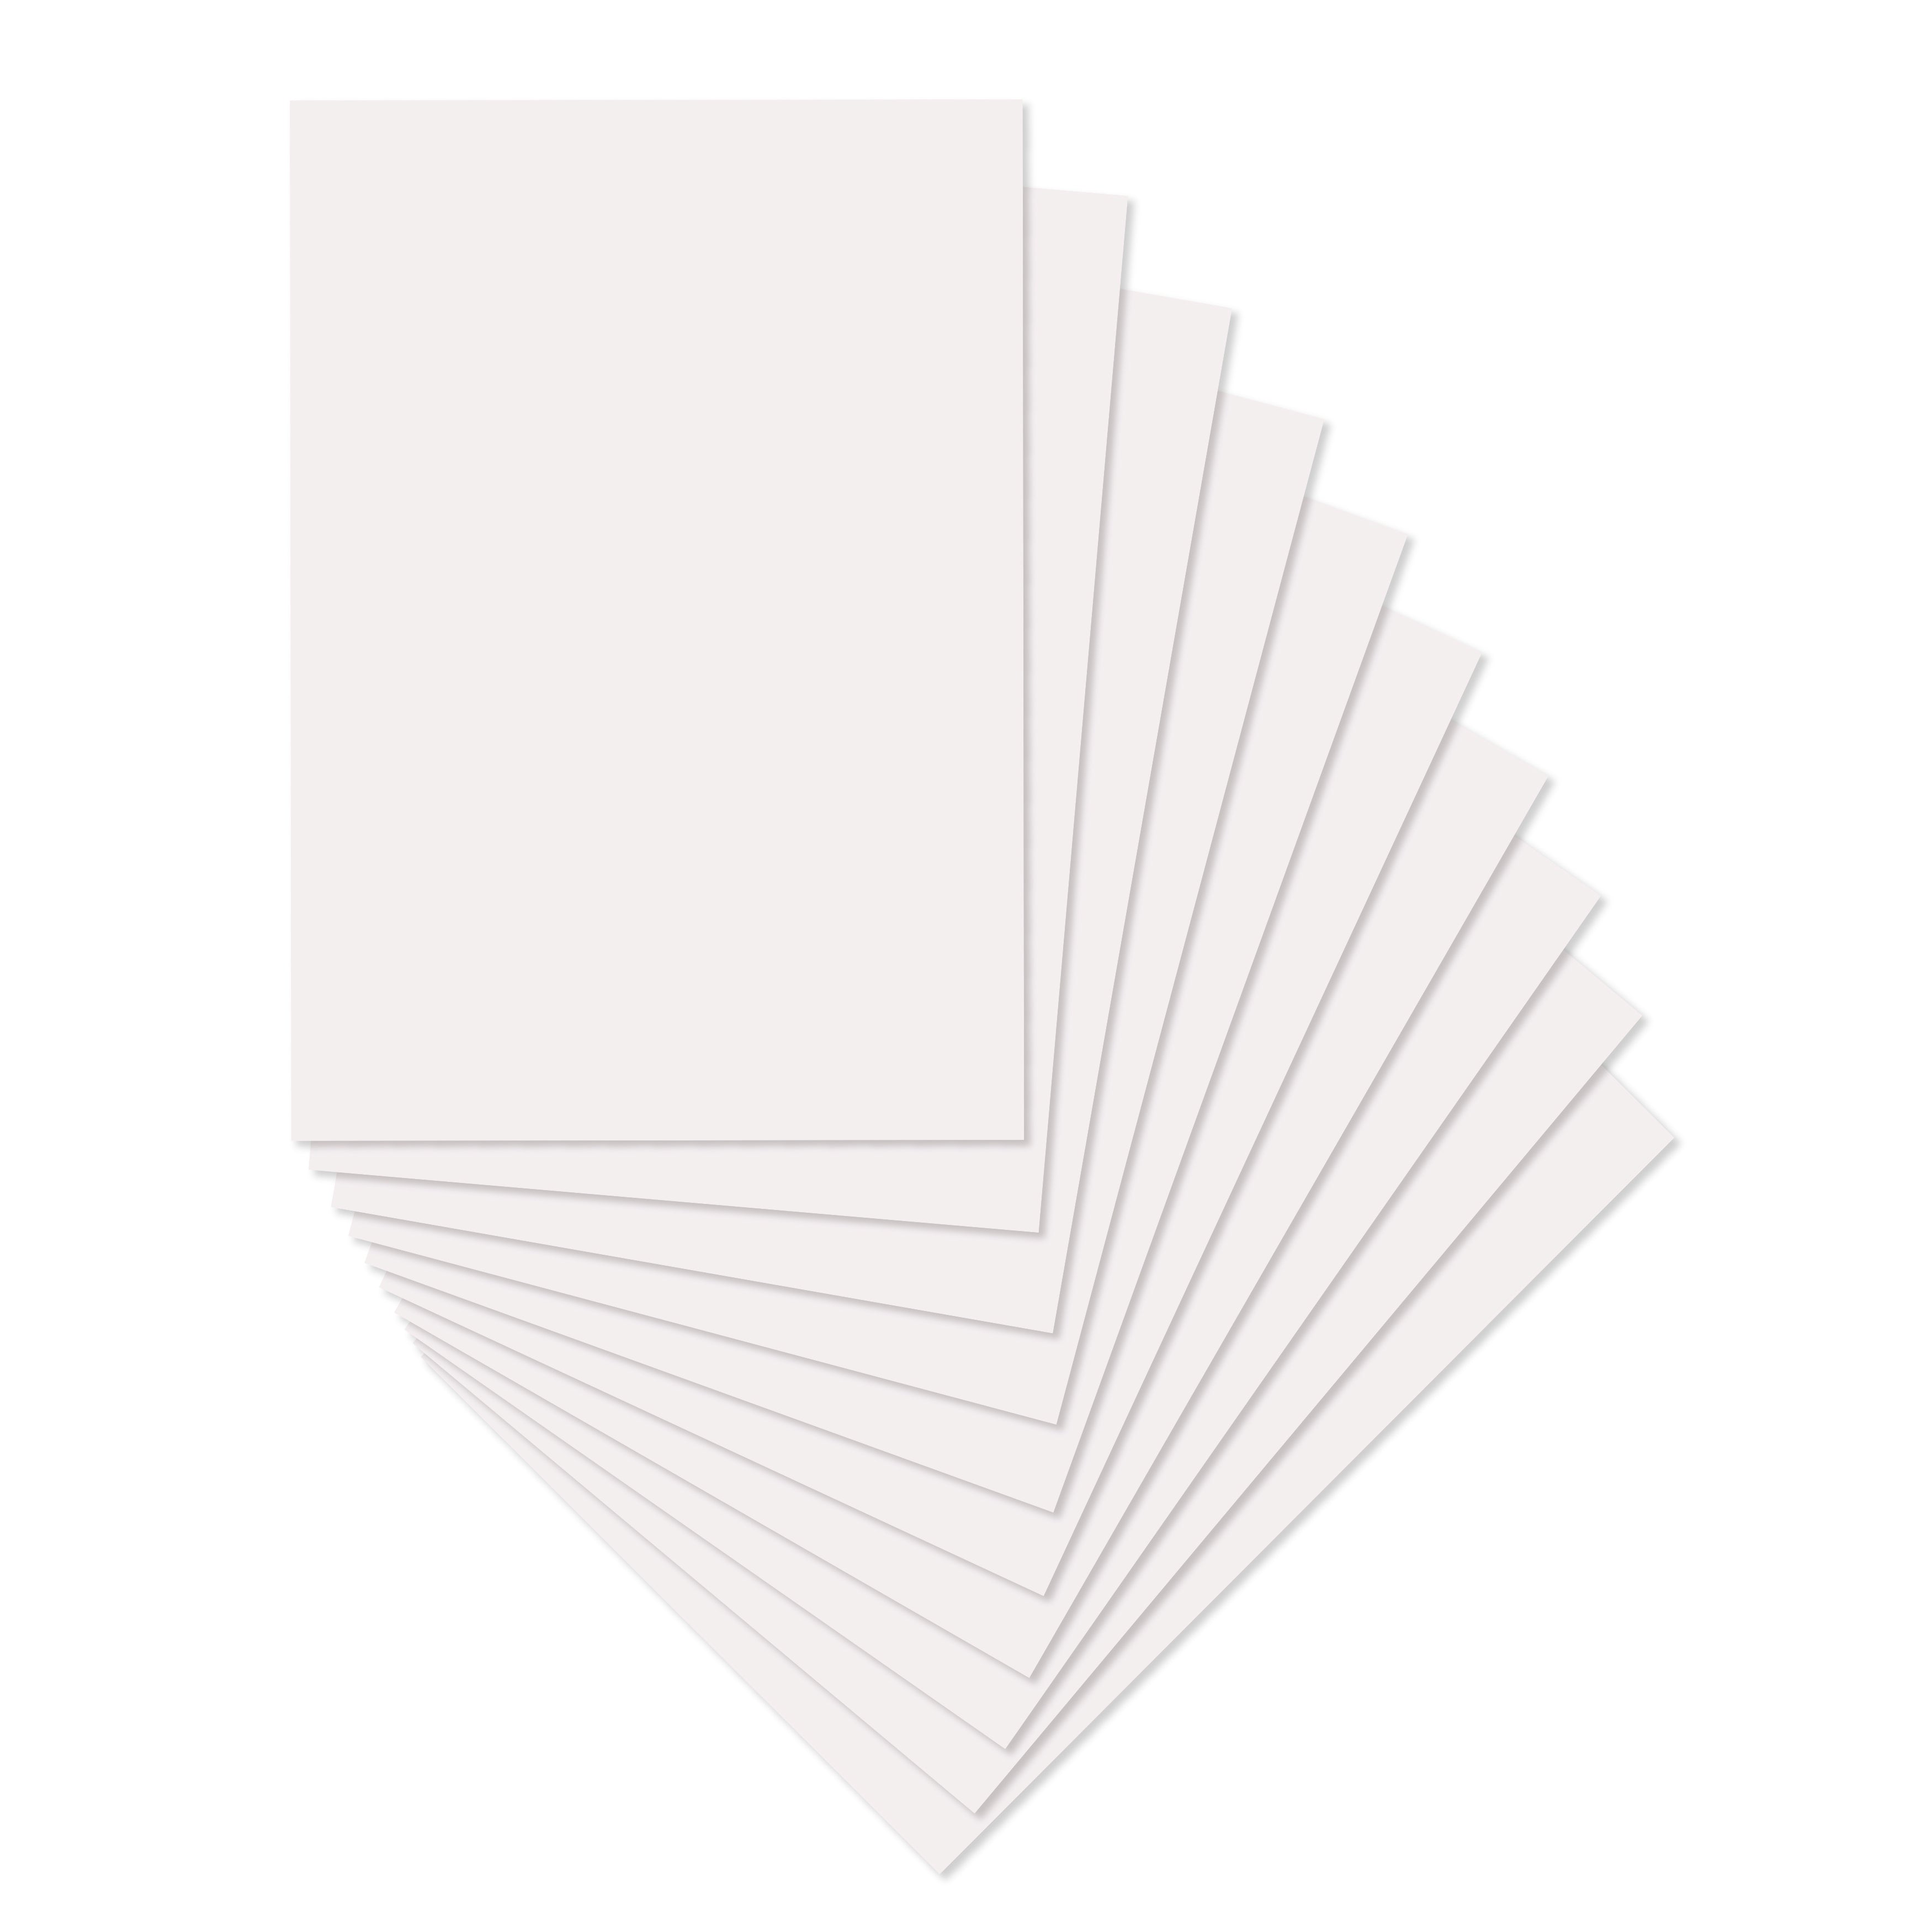 Couture Creations - Blending Card 250gsm (10 sheet pack)